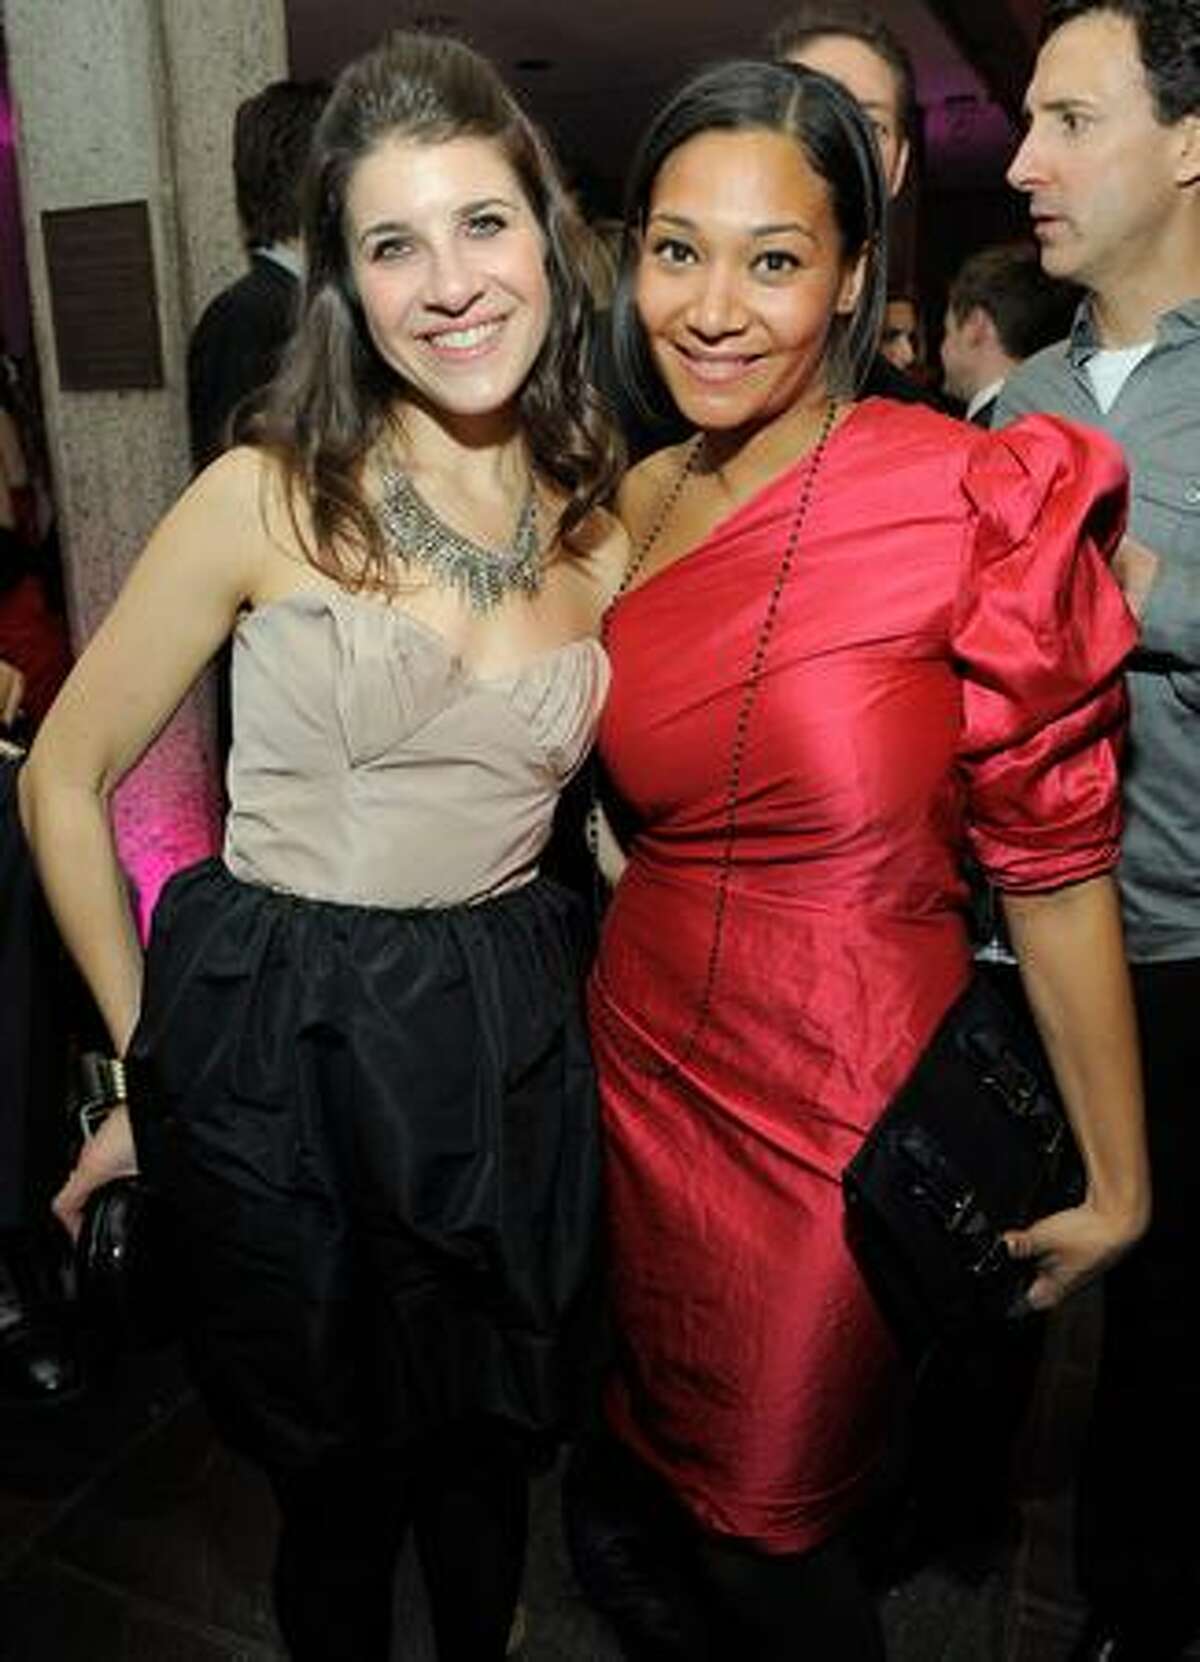 Rachel Lee and Monique Pean attend the 2009 Whitney Museum Gala Studio Party at The Whitney Museum of American Art in New York City.